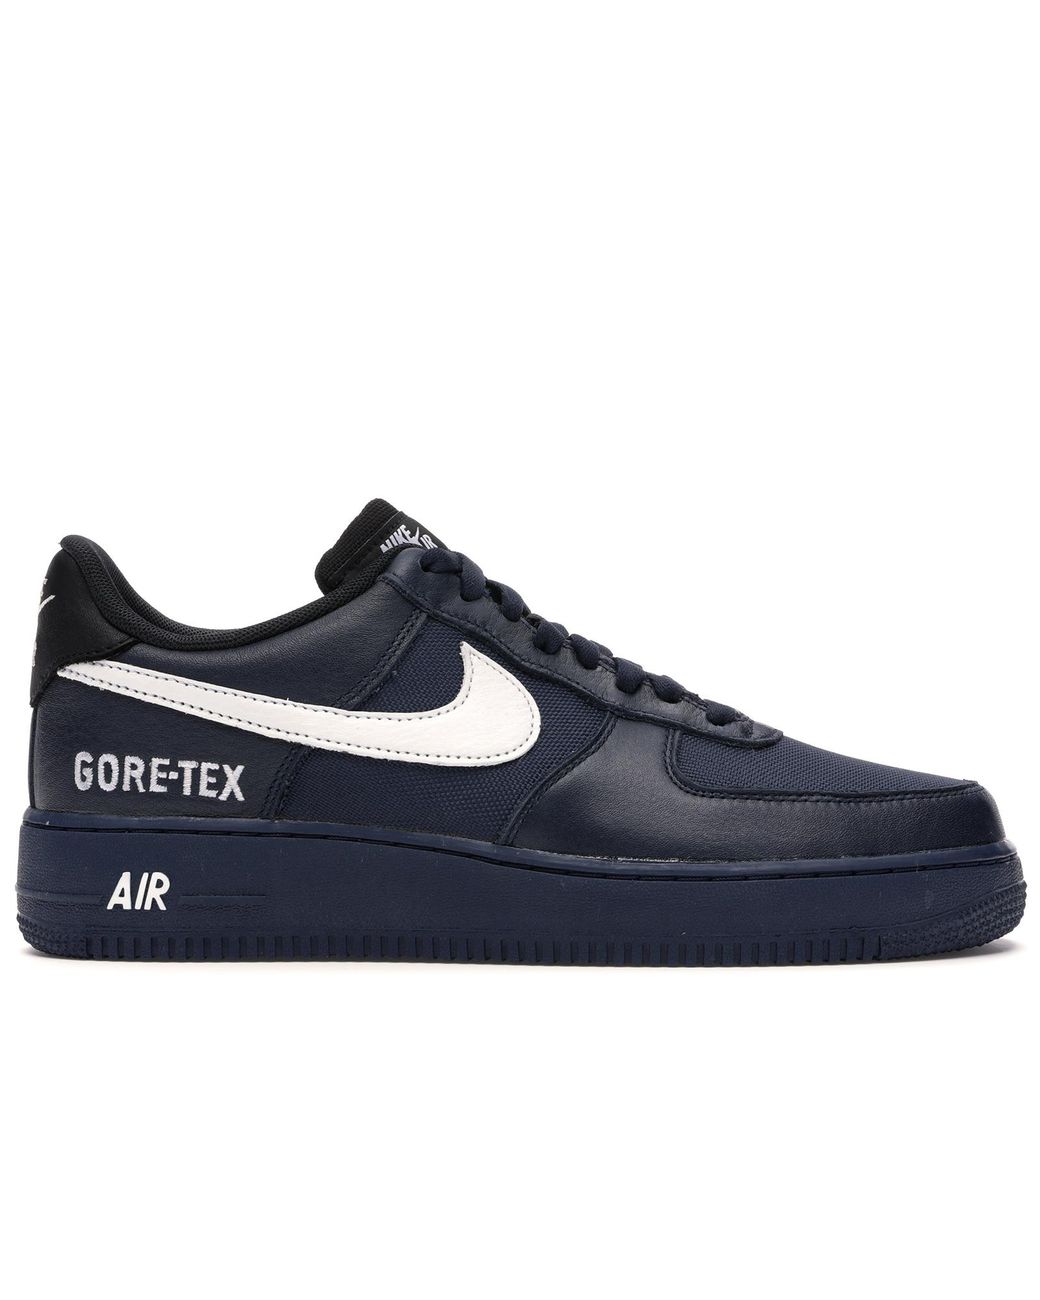 nike air force 1 low obsidian